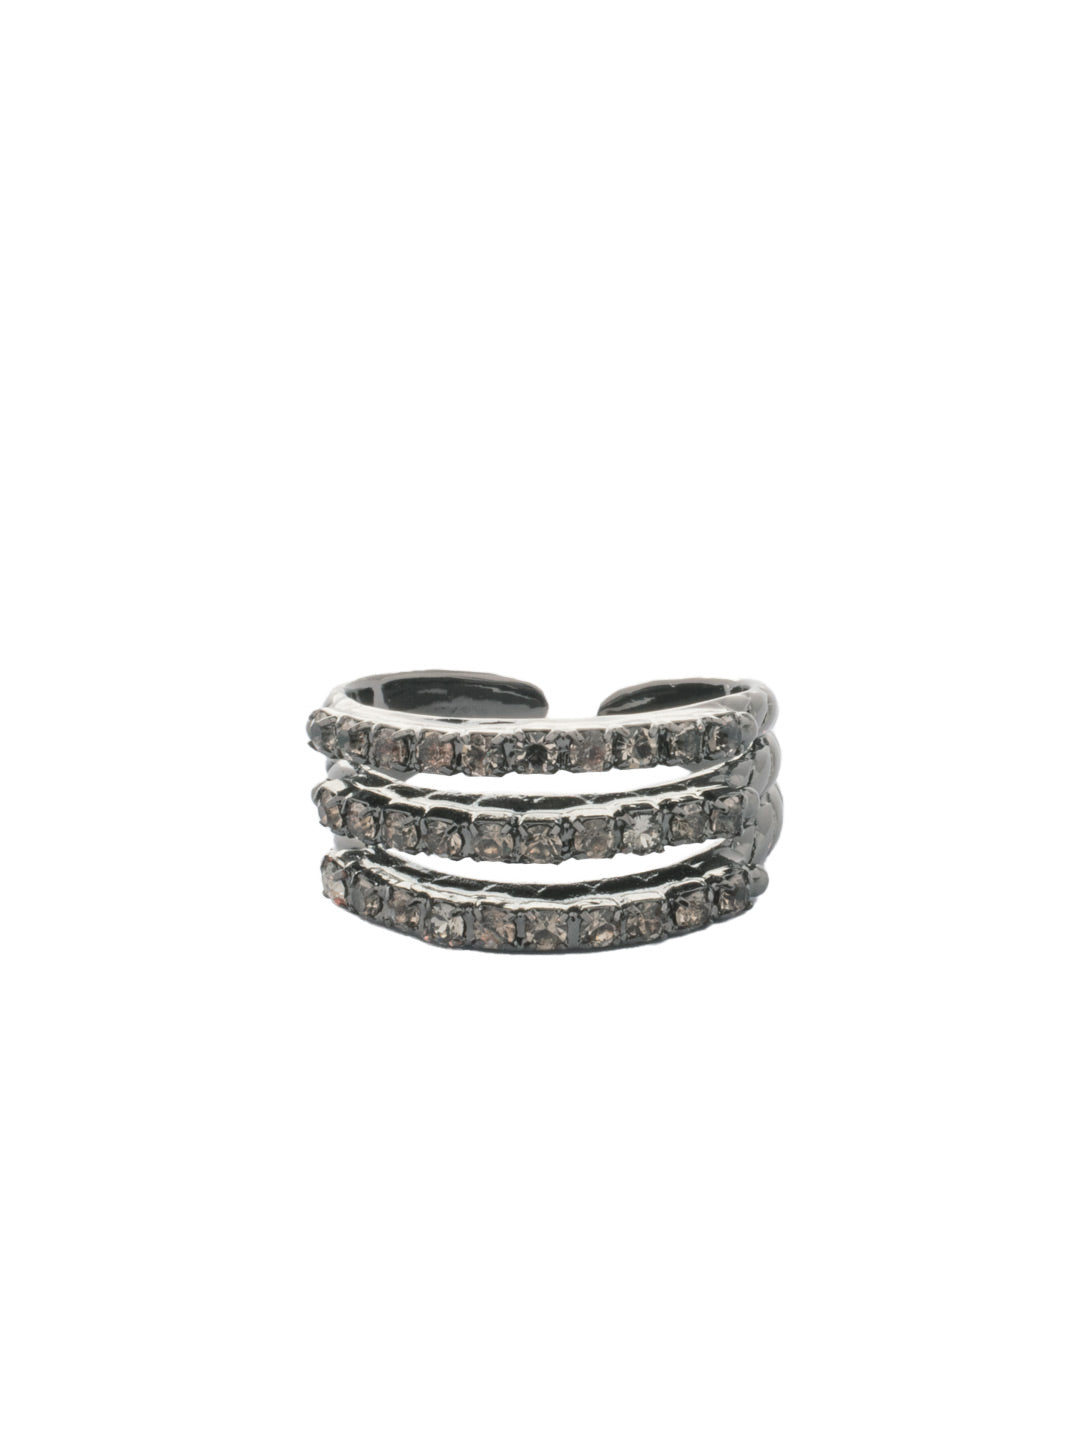 Rosamund Stacked Ring - RFL13GMBD - <p>The Rosamund Stacked Ring features embellished rhinestone bands stacked as one adjustable ring. From Sorrelli's Black Diamond collection in our Gun Metal finish.</p>